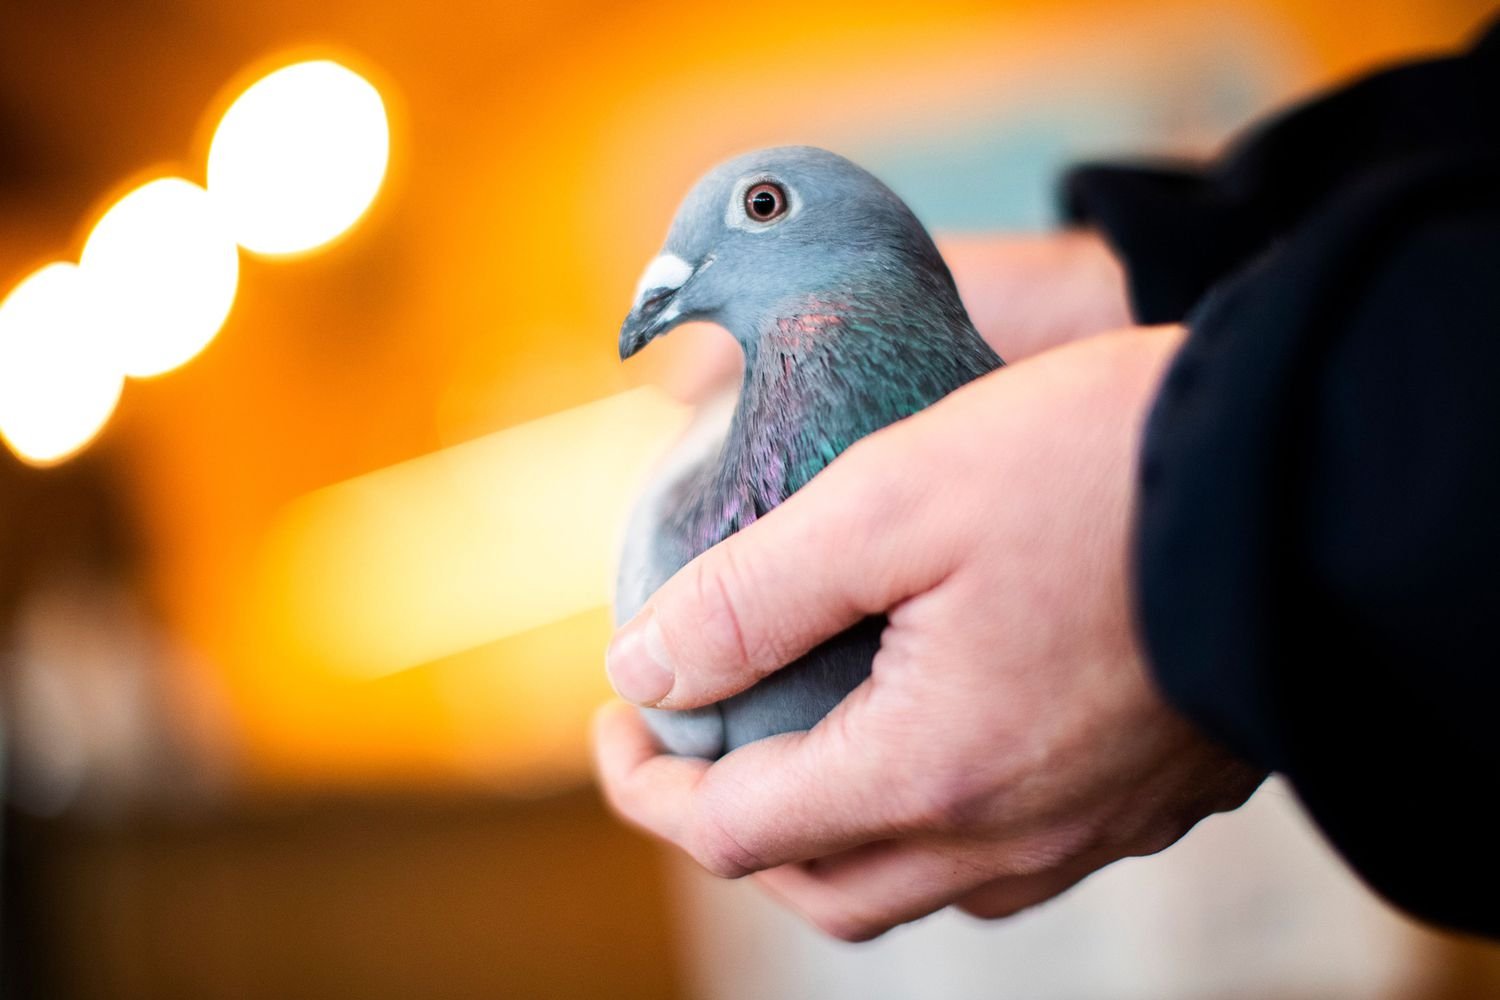 Belgian Racing Pigeon Sold at Auction for Record-breaking $1.9 Million